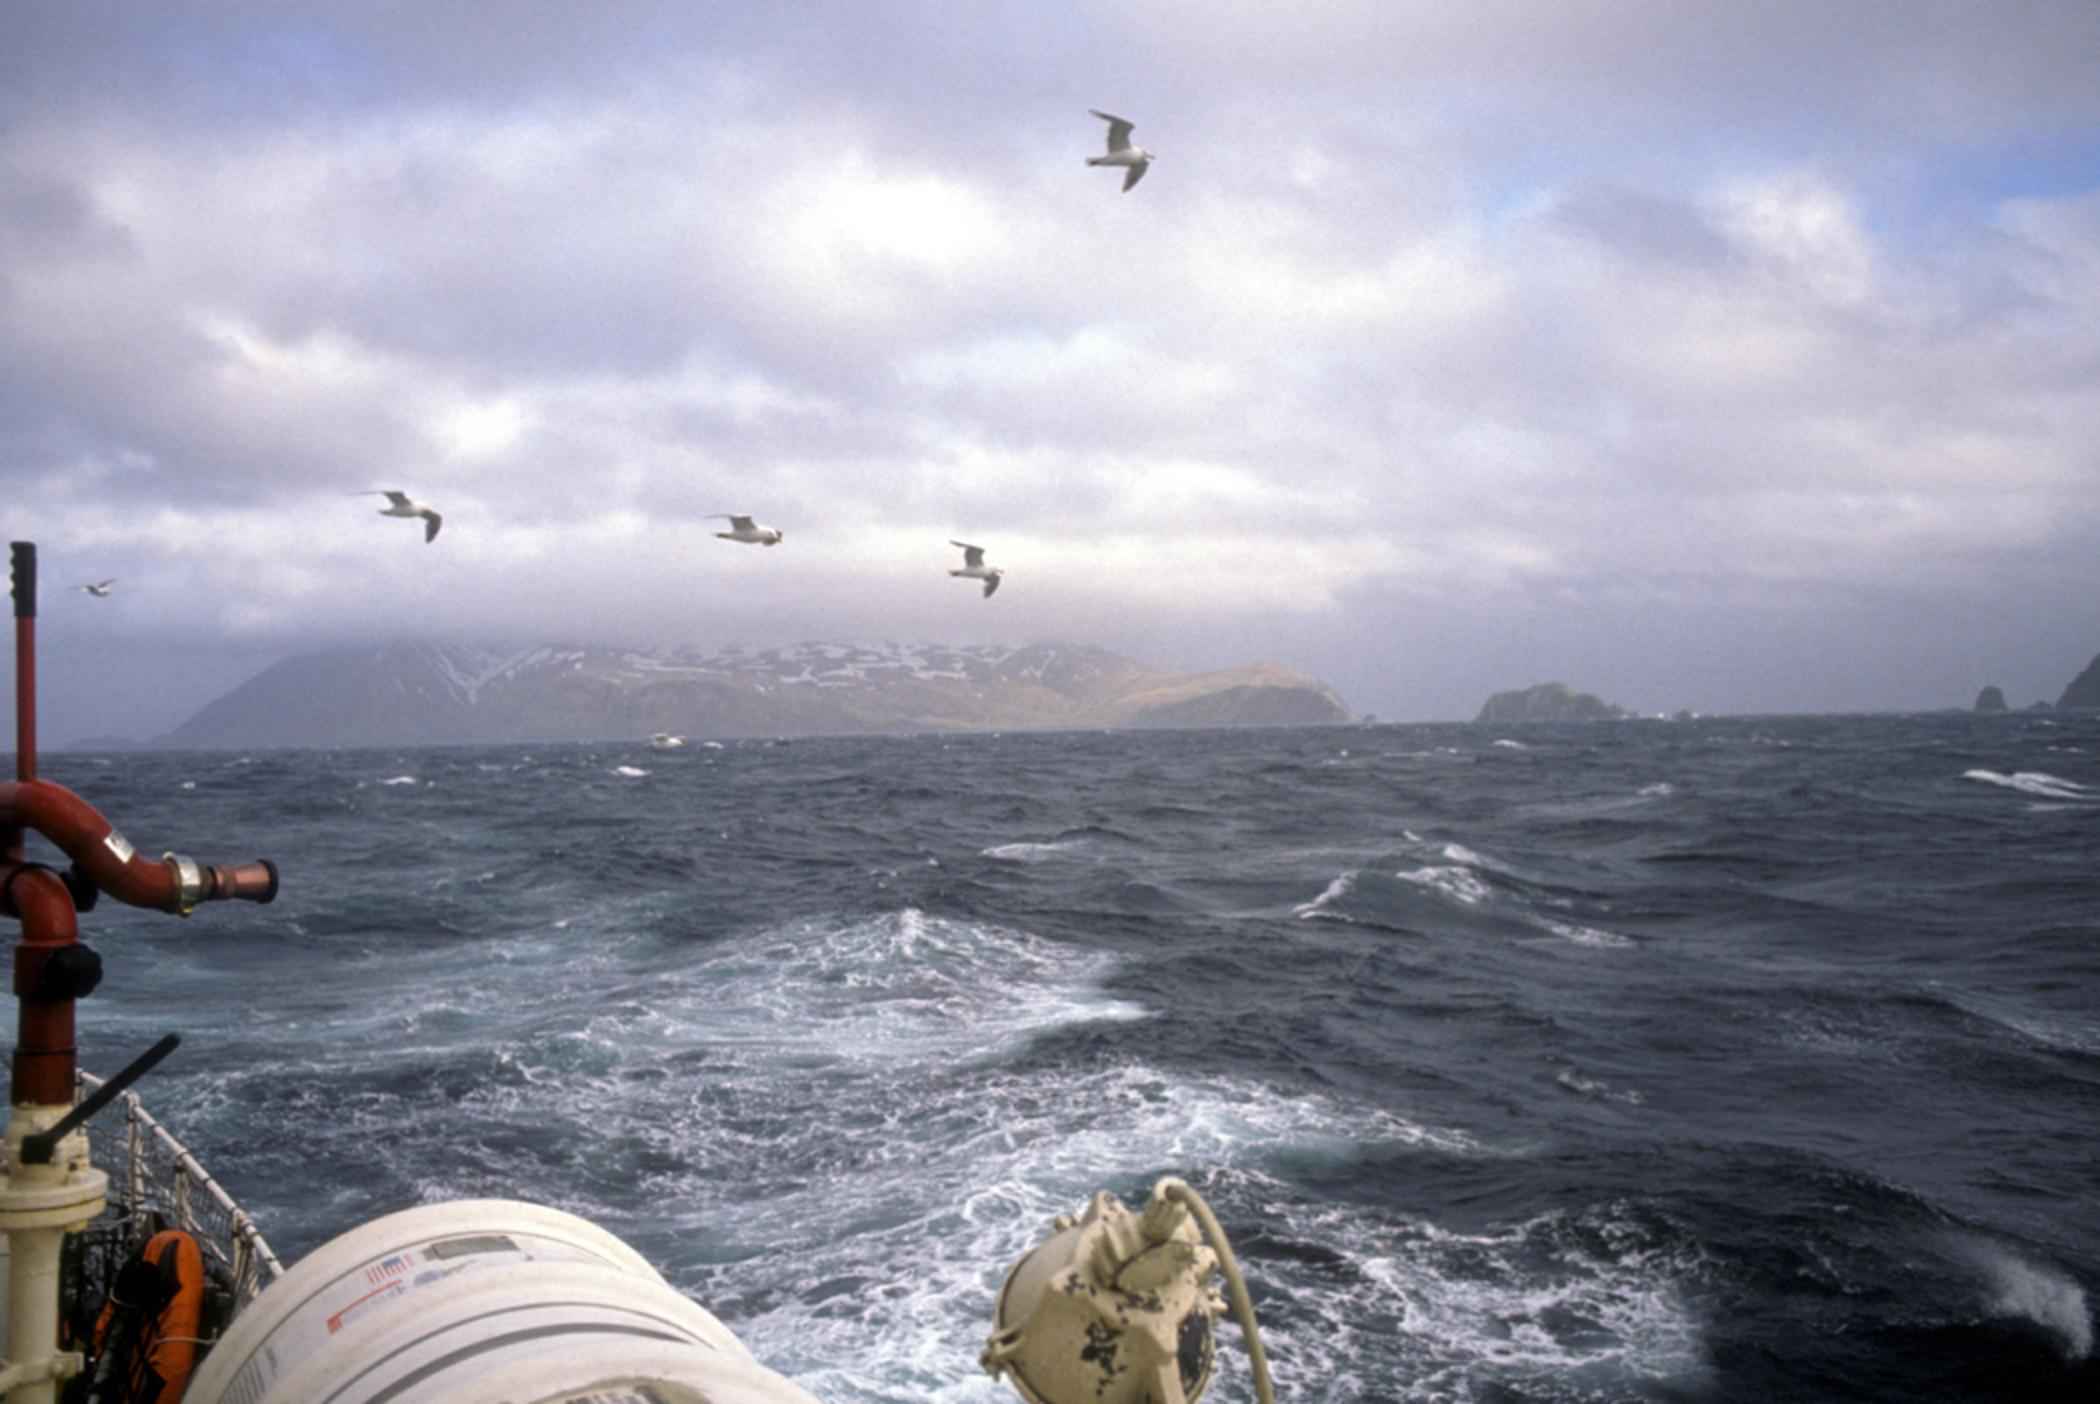 File:Boat in storm at sea.jpg - Wikimedia Commons